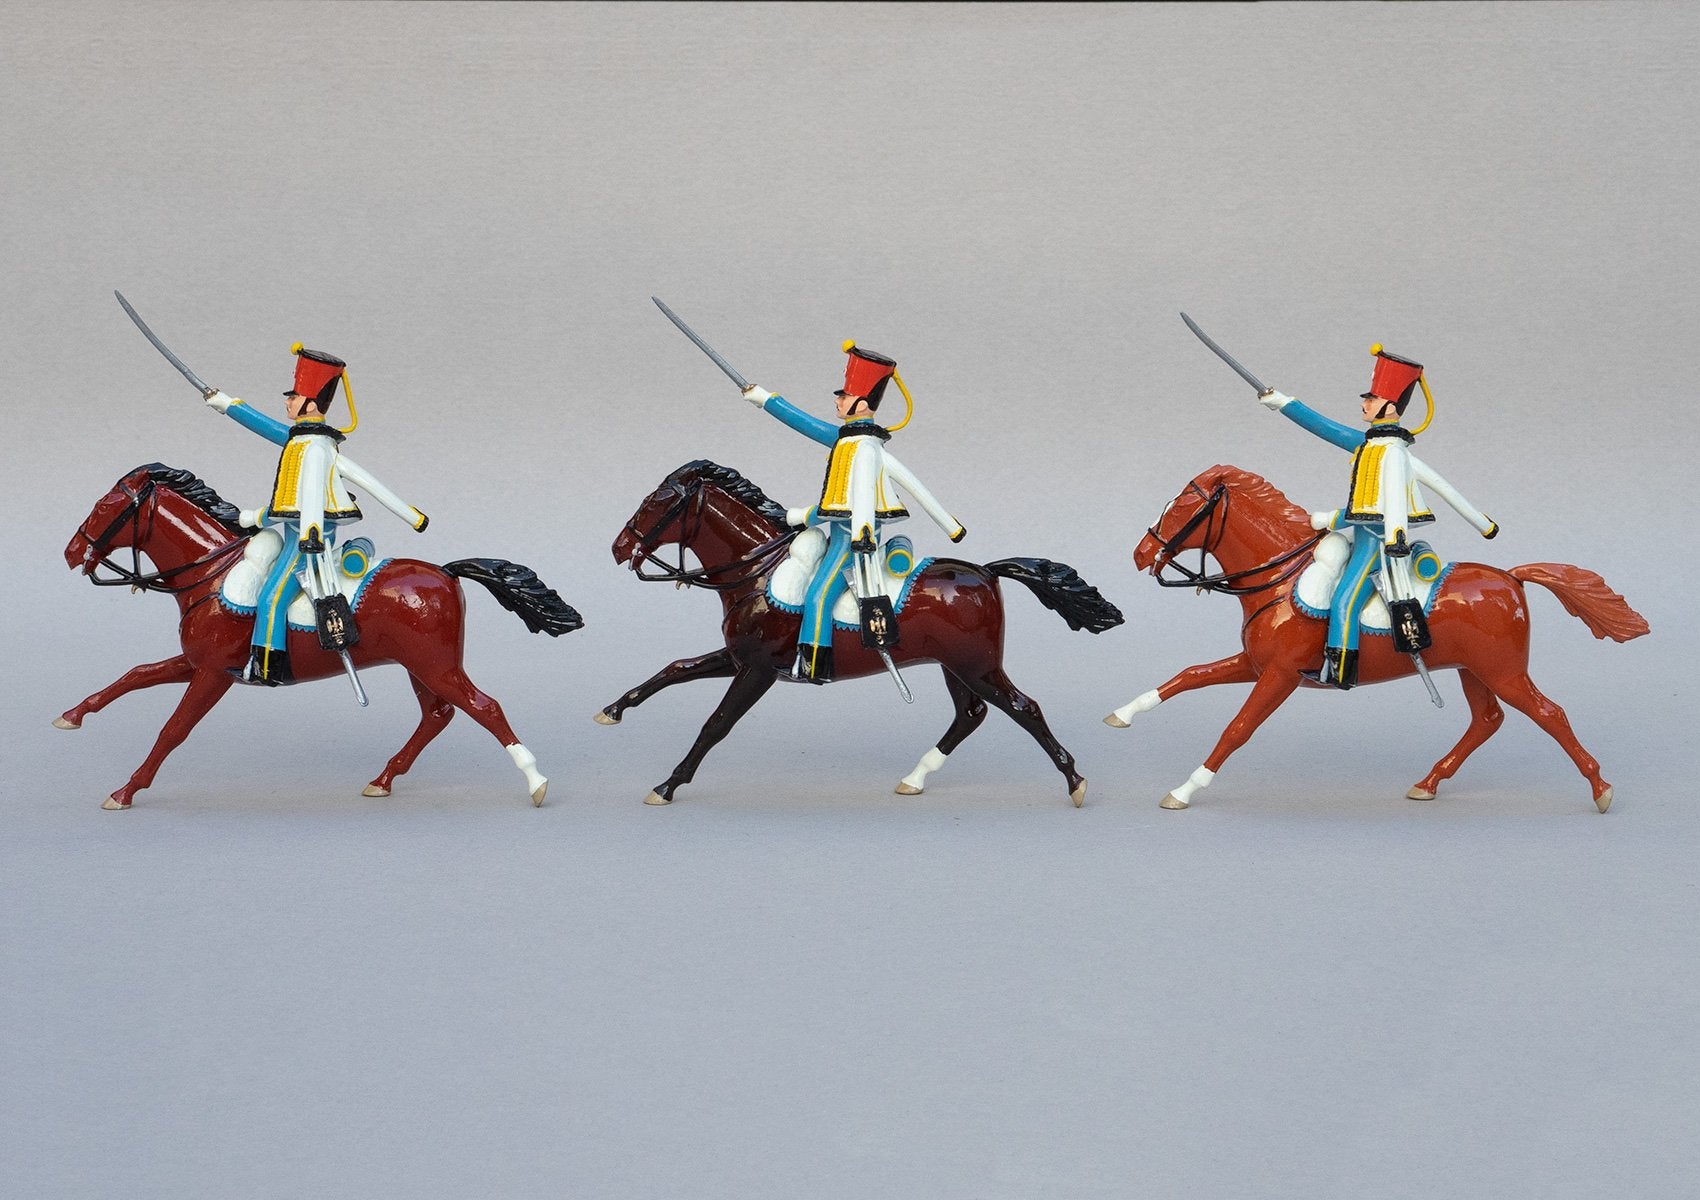 Set 149 5th Hussars | French Cavalry | Napoleonic Wars | Three mounted cavalrymen with rifles and sabres, scarlet shakos, sky blue jacket and white pelisse | Waterloo | © Imperial Productions | Sculpt by David Cowe